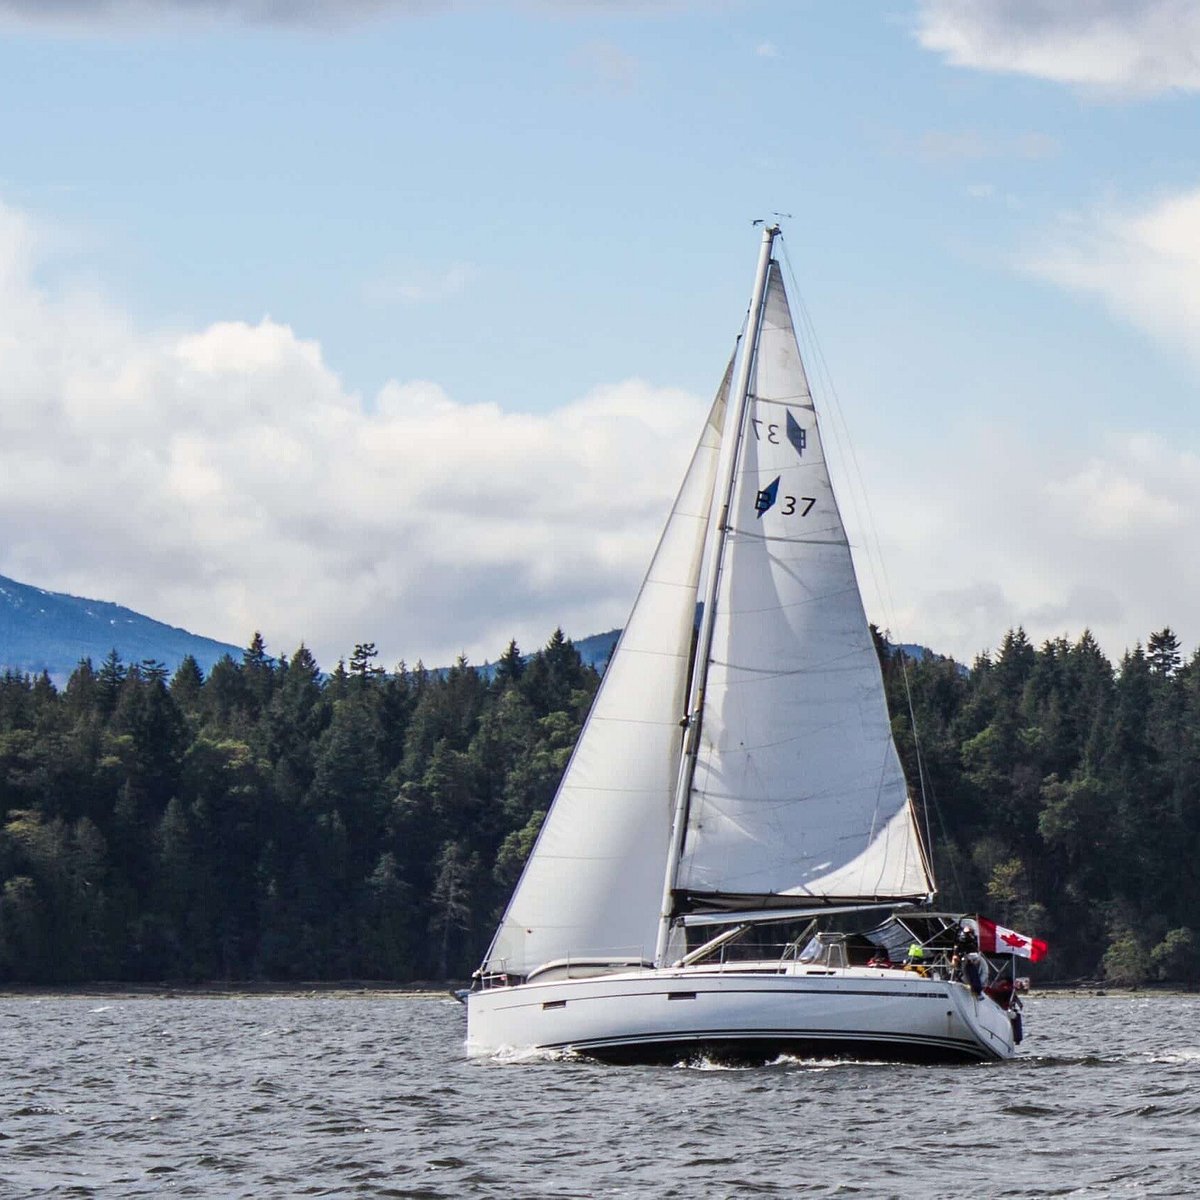 cooper boating yacht charters & training vancouver reviews